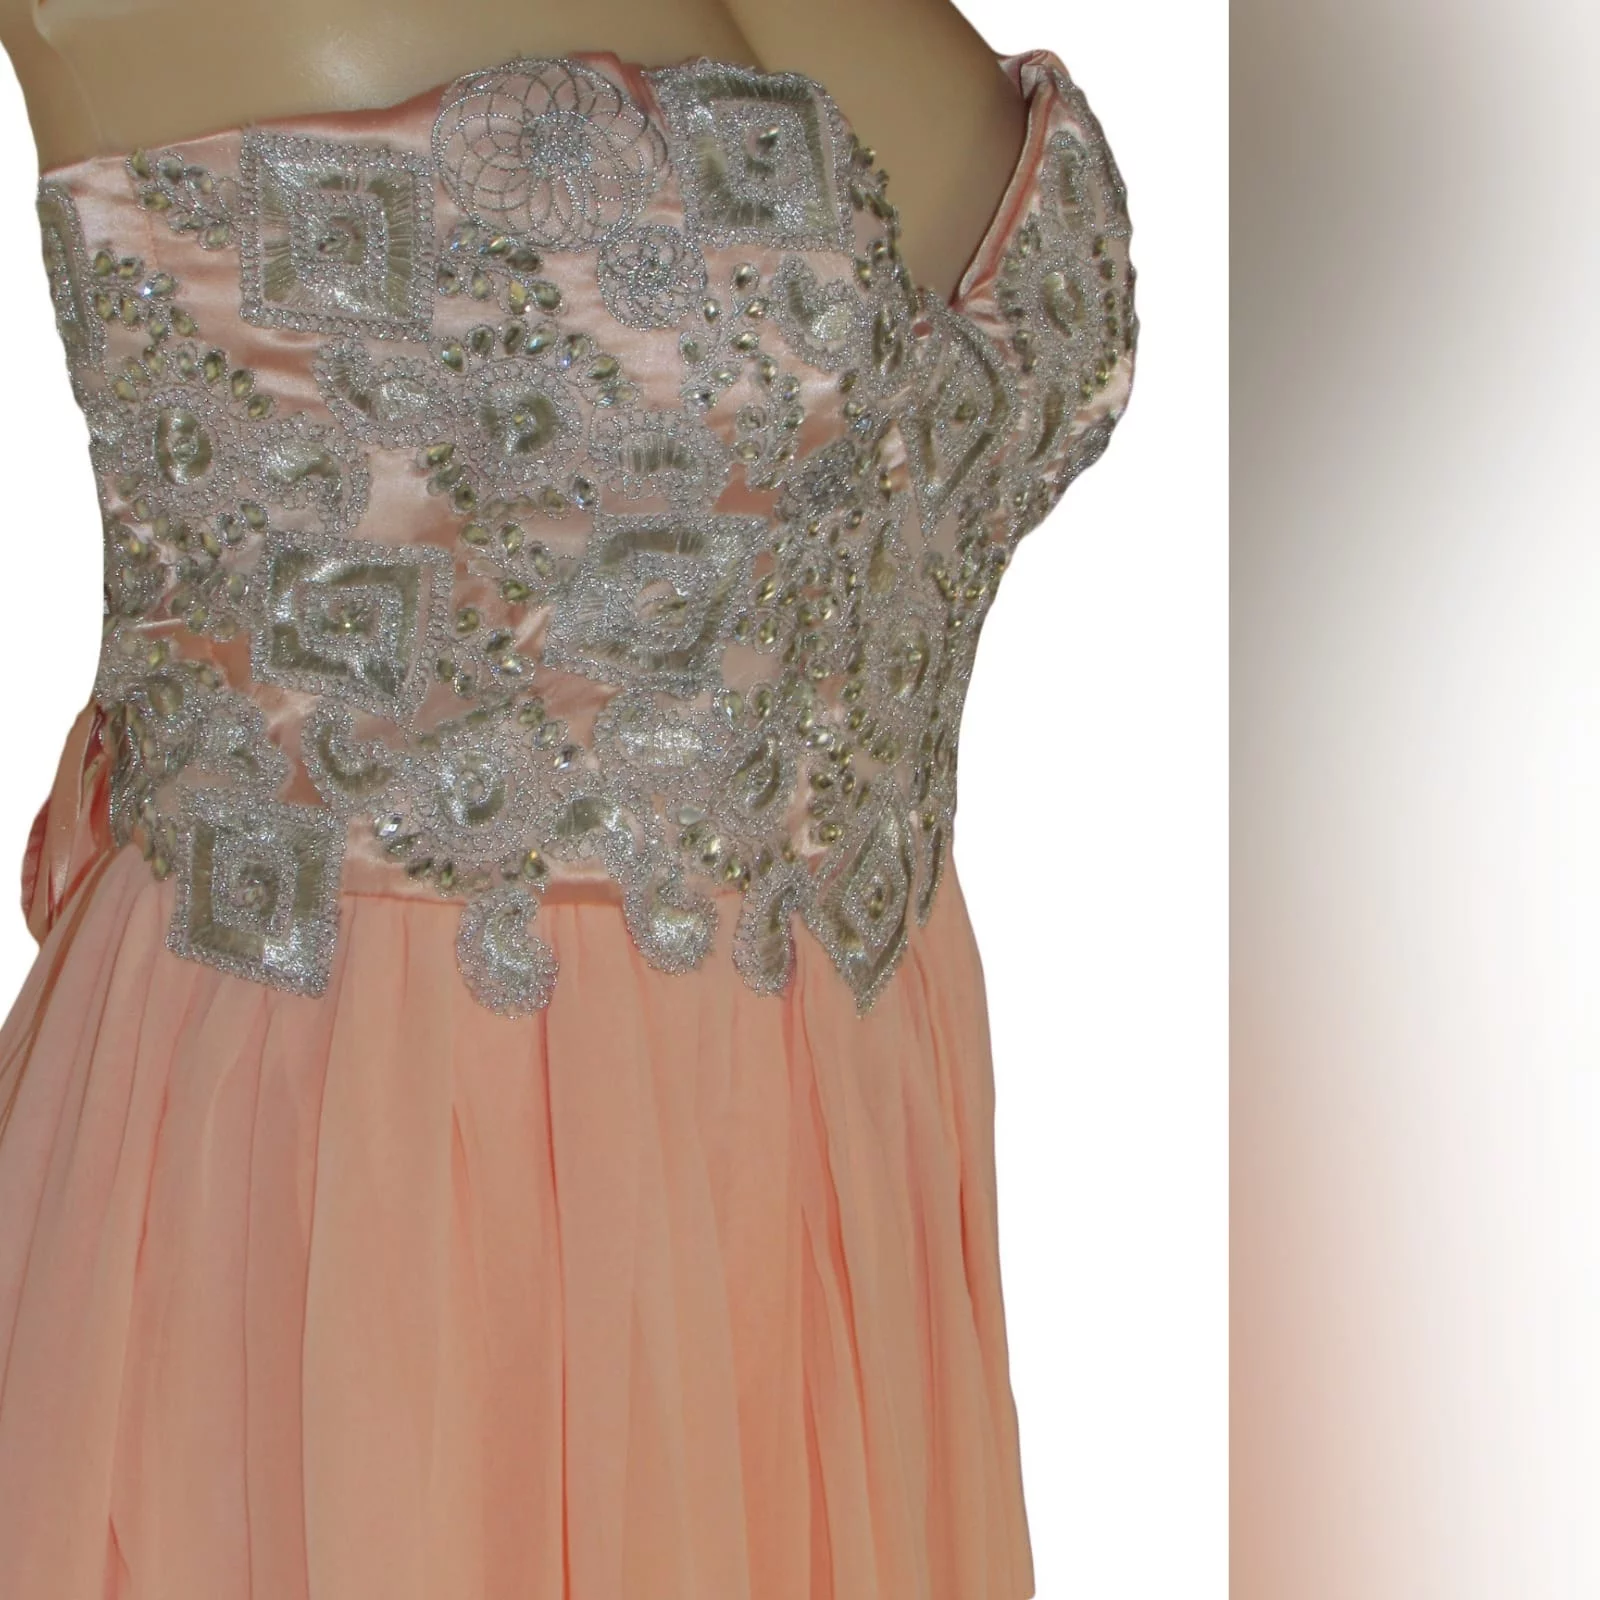 Peach and silver fun prom dress 3 peach and silver fun prom dress. Bodice detailed with appliques and beads, with a lace-up back. Bottom with gathered chiffon and an overlayer opened in front.